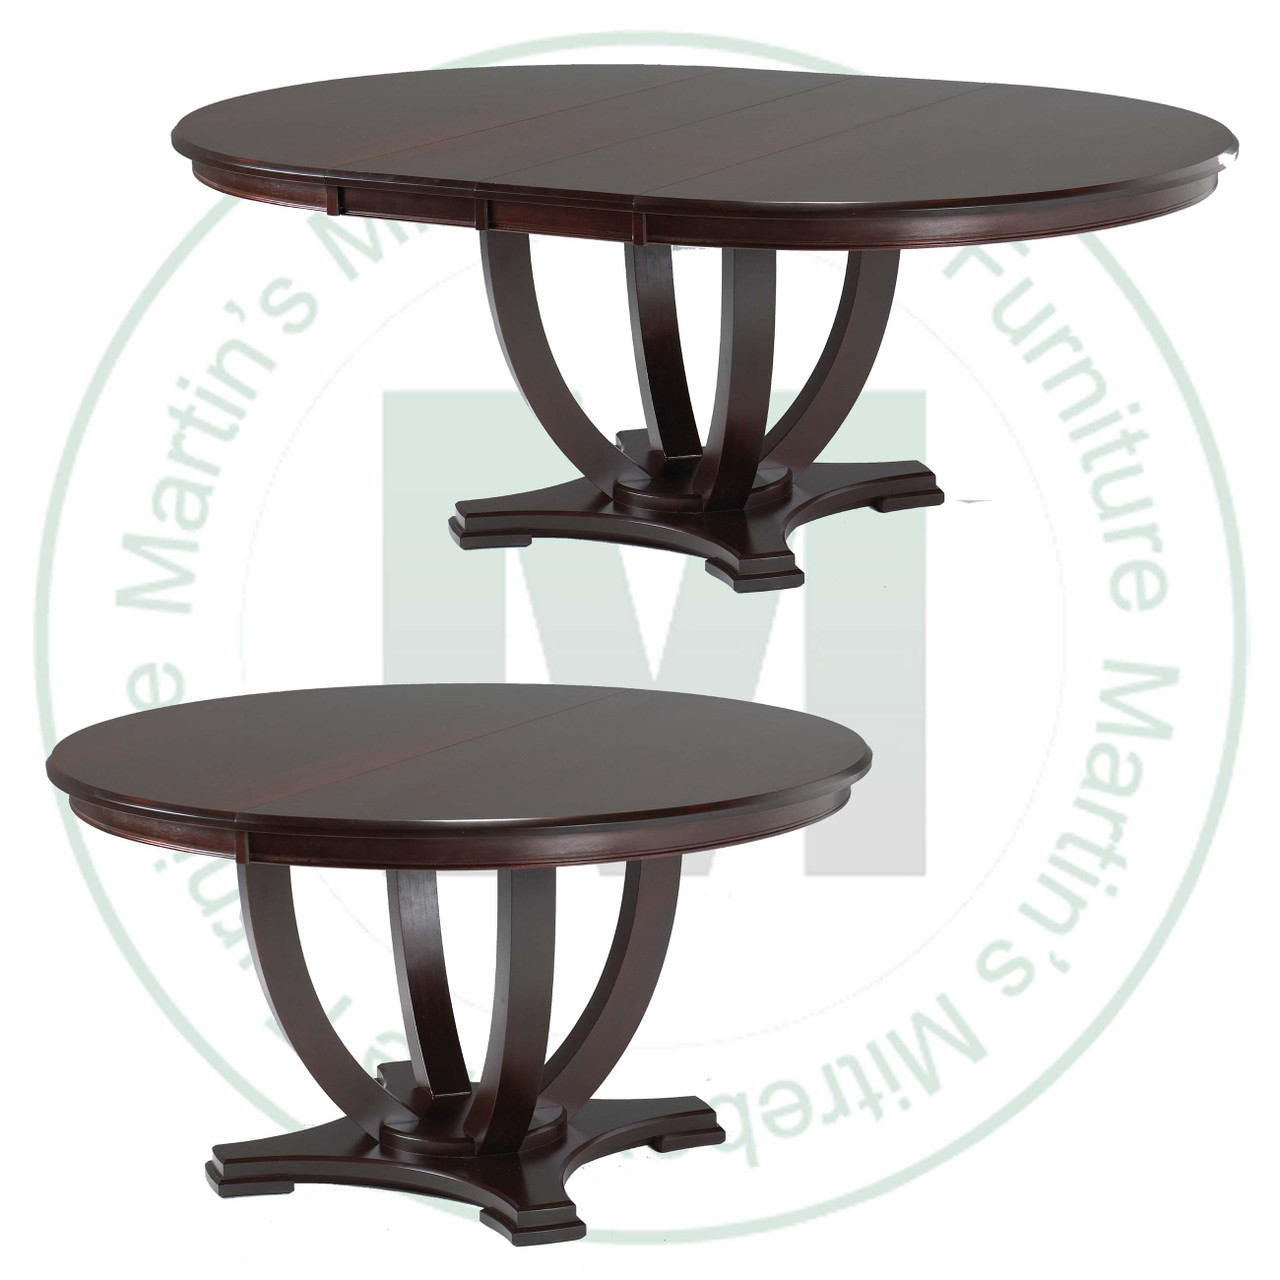 Maple Tuscany Single Pedestal Table 52''D x 52''W x 30''H With 2 - 12'' Leaves